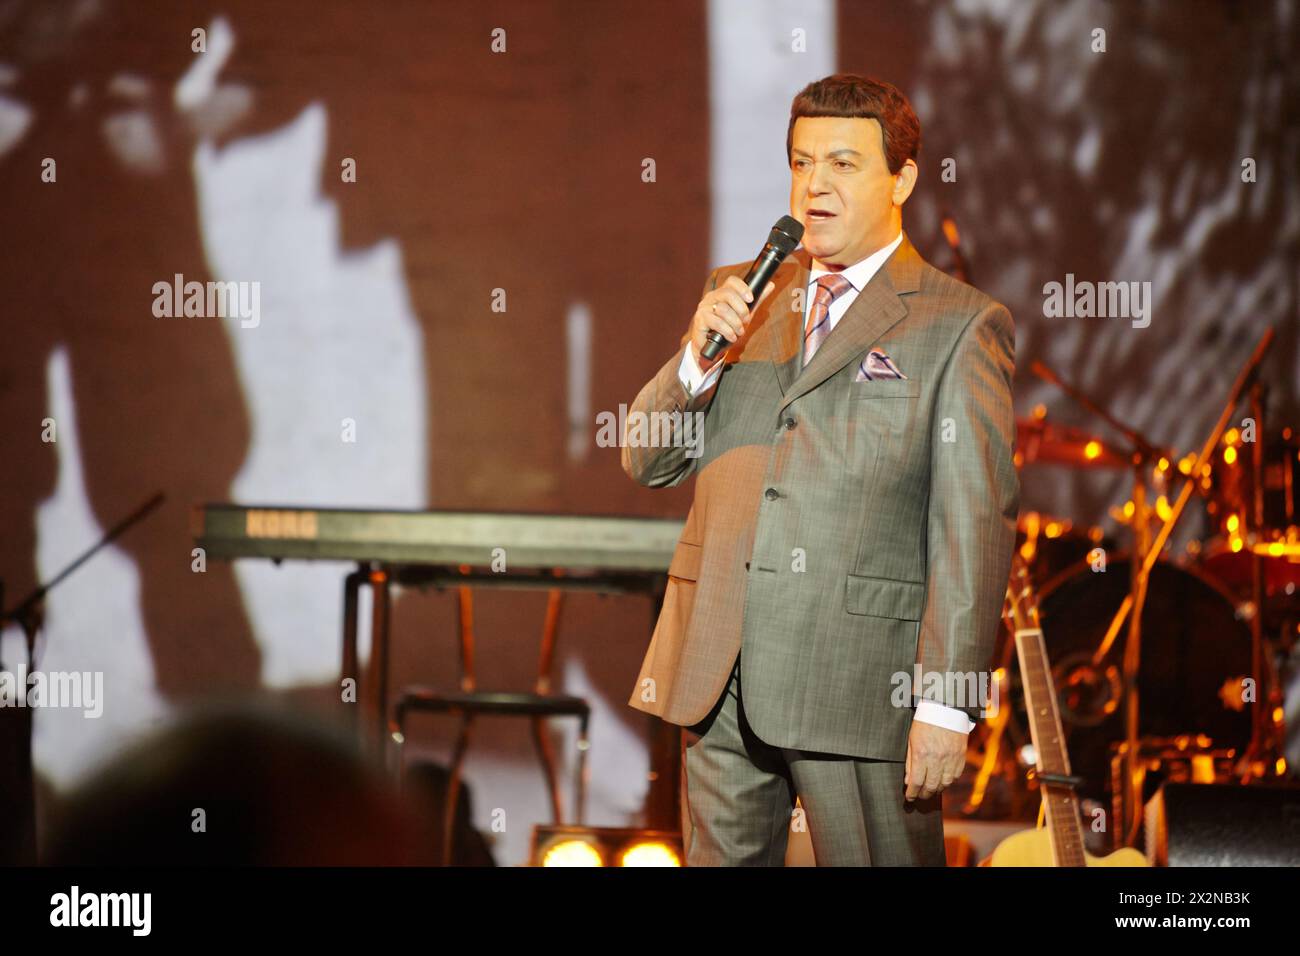 MOSCOW - JAN 23: Singer Iosif Kobzon performs on stage at Taganka Theater during Award ceremony of Prize named after Vladimir Vysotsky Own Track, Jan Stock Photo